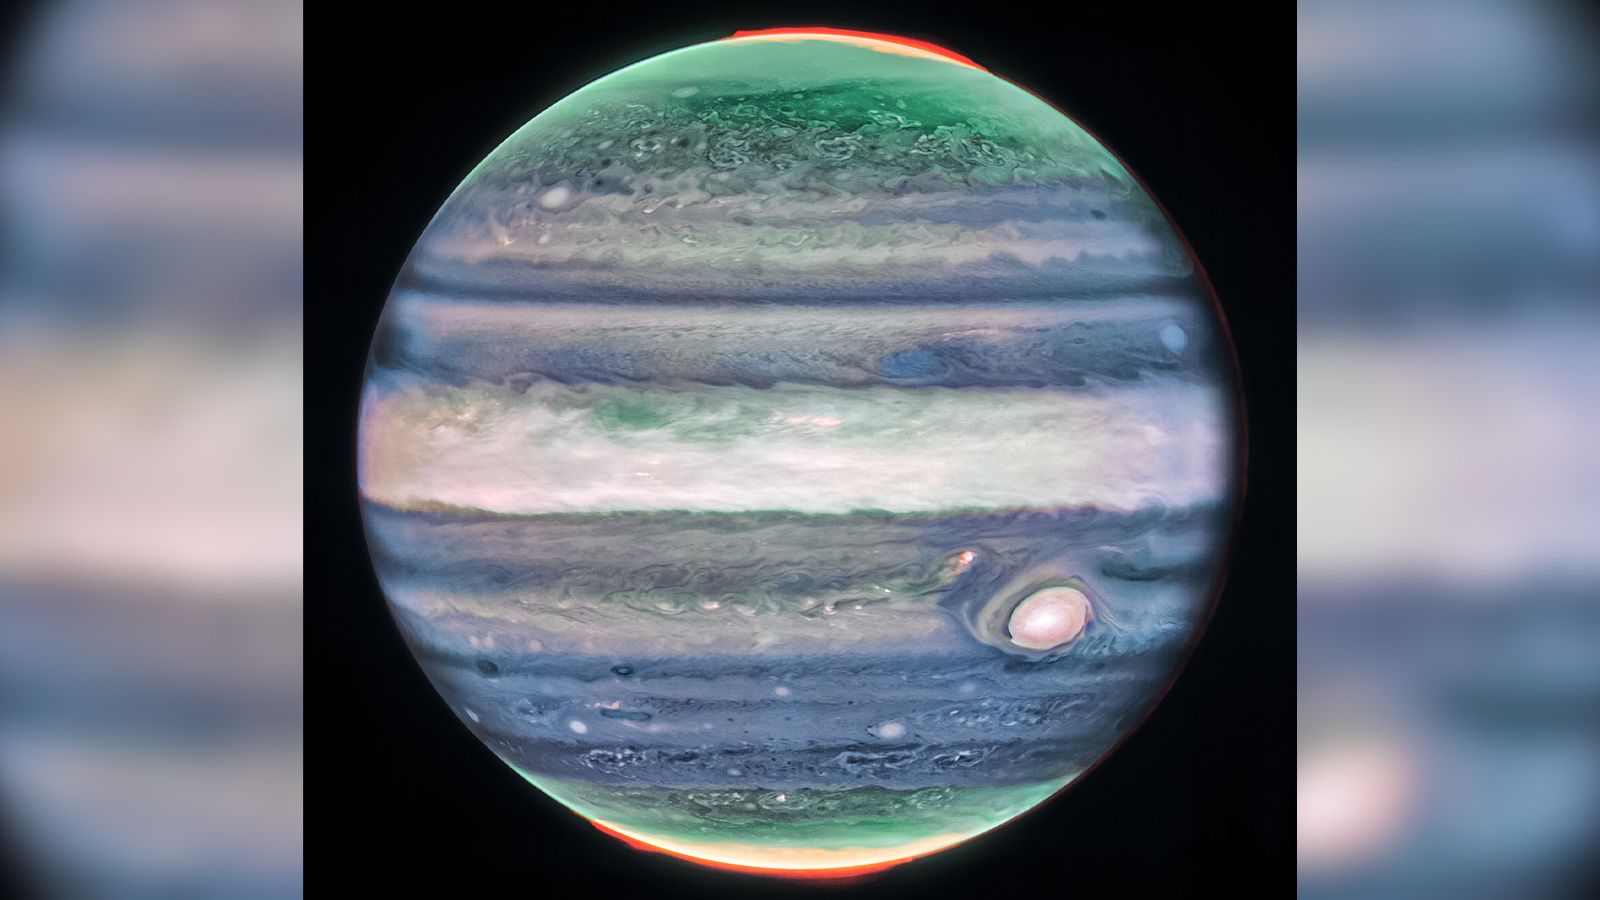 The Webb Telescope has discovered a never-before-seen phenomenon in Jupiter’s atmosphere.